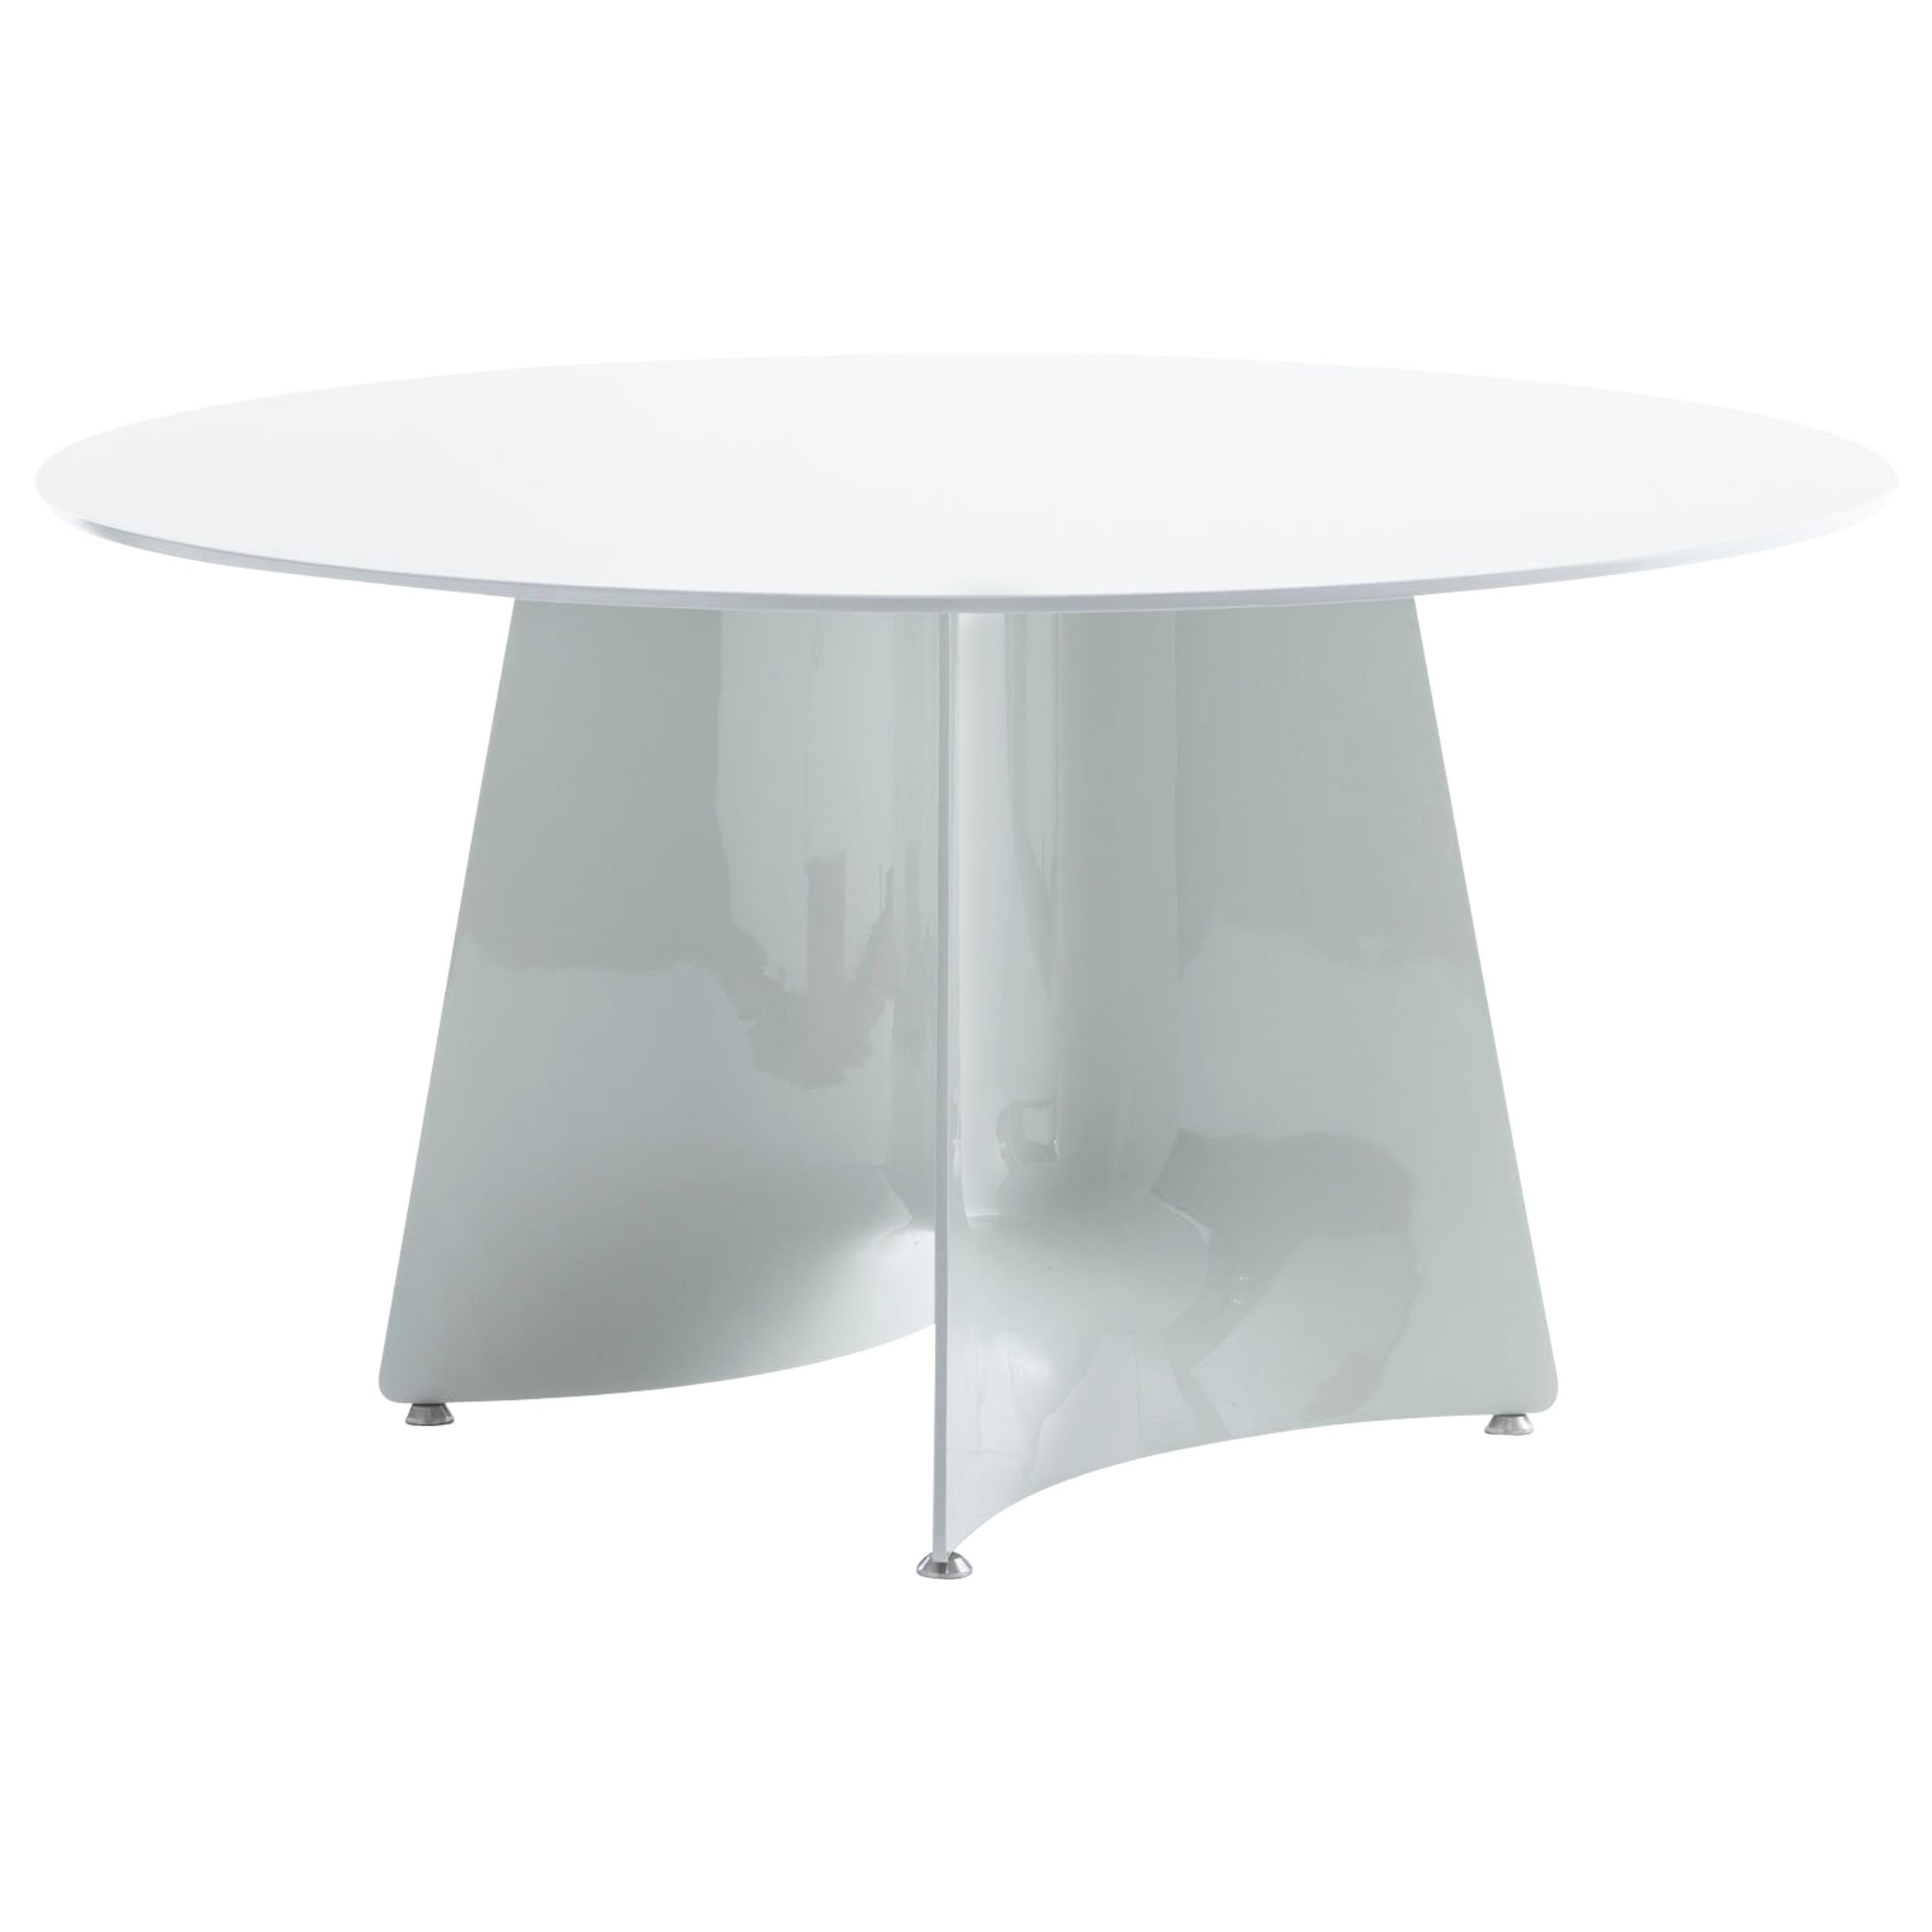 Baleri Italia Bentz High Round White Table with Wood Top by Jeff Miller For Sale